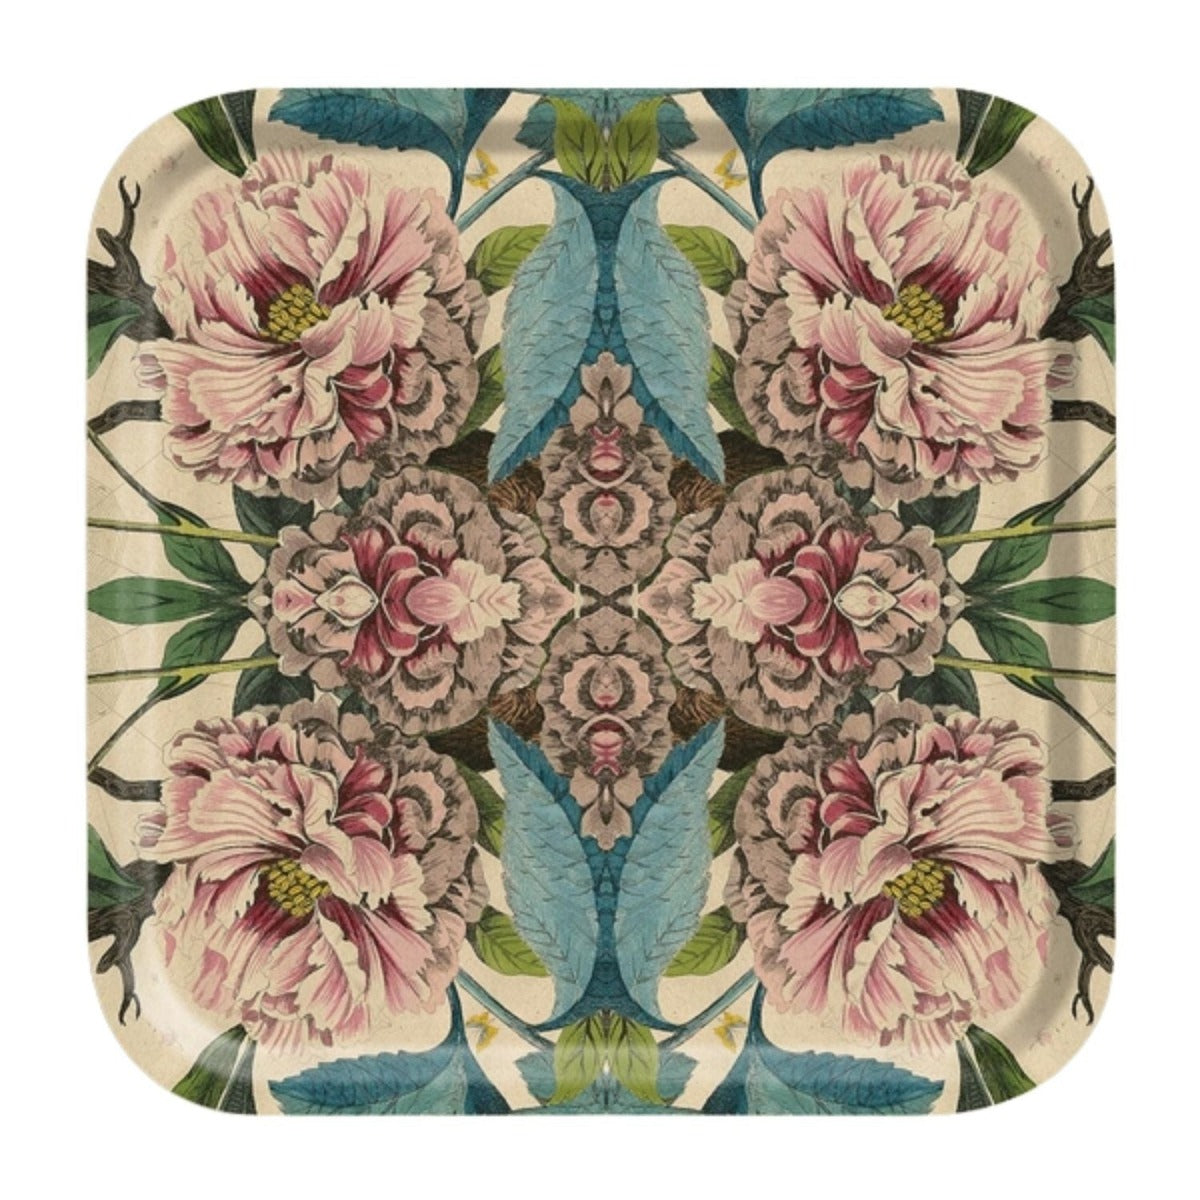 Patch NYC Peonies Square Birch Wood Tray